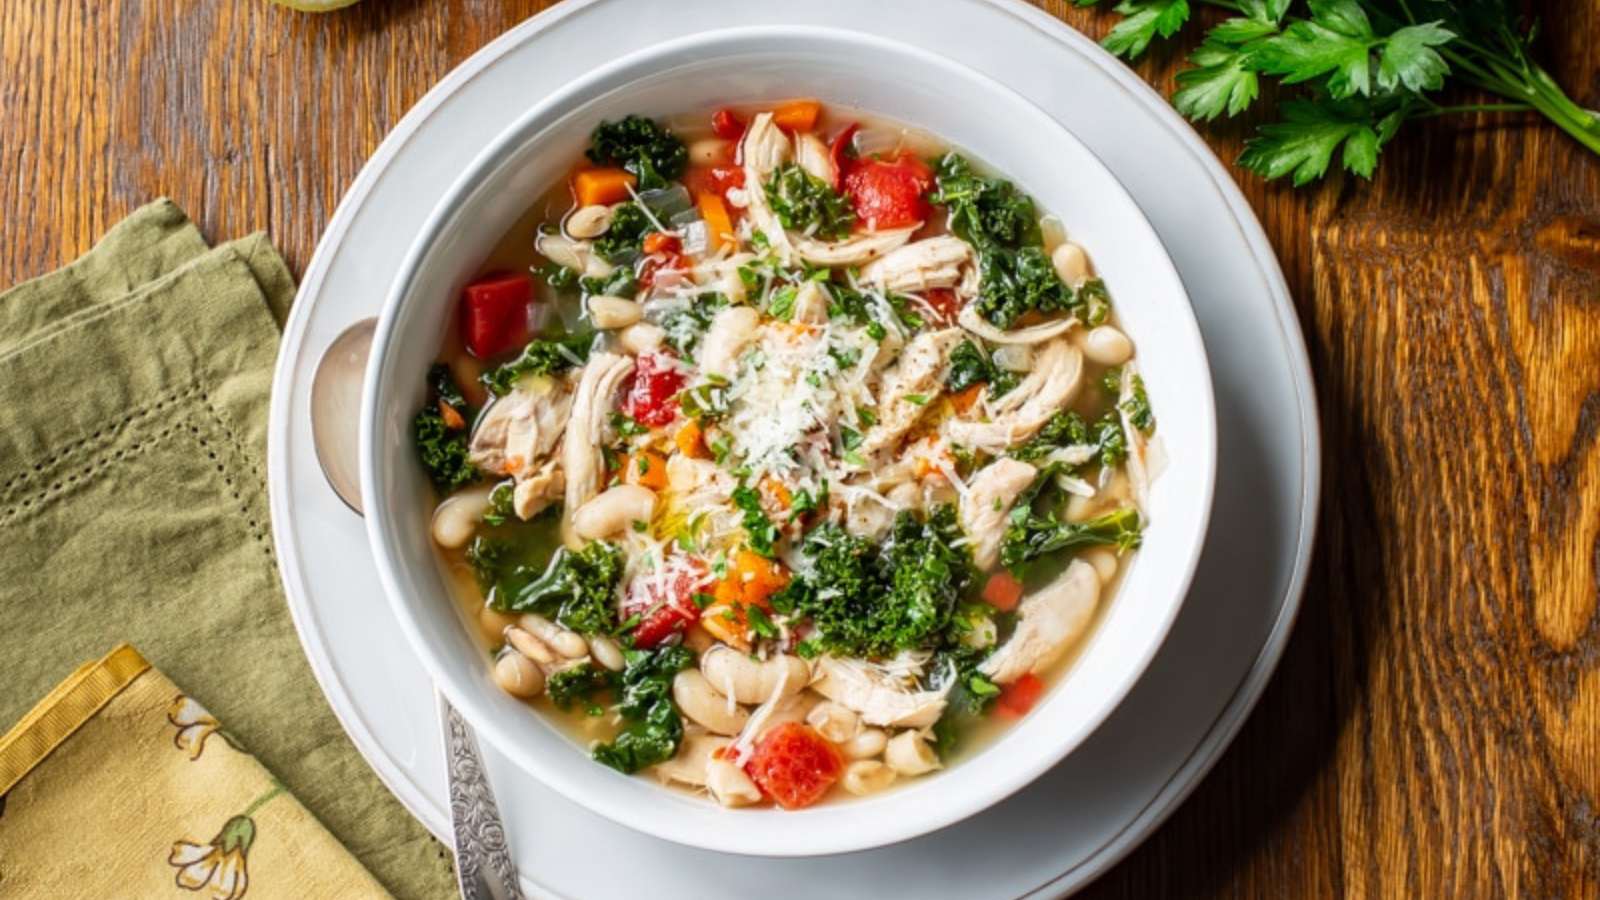 A white bowl full of shredded chicken, white beans, and vegetables in a rich broth.